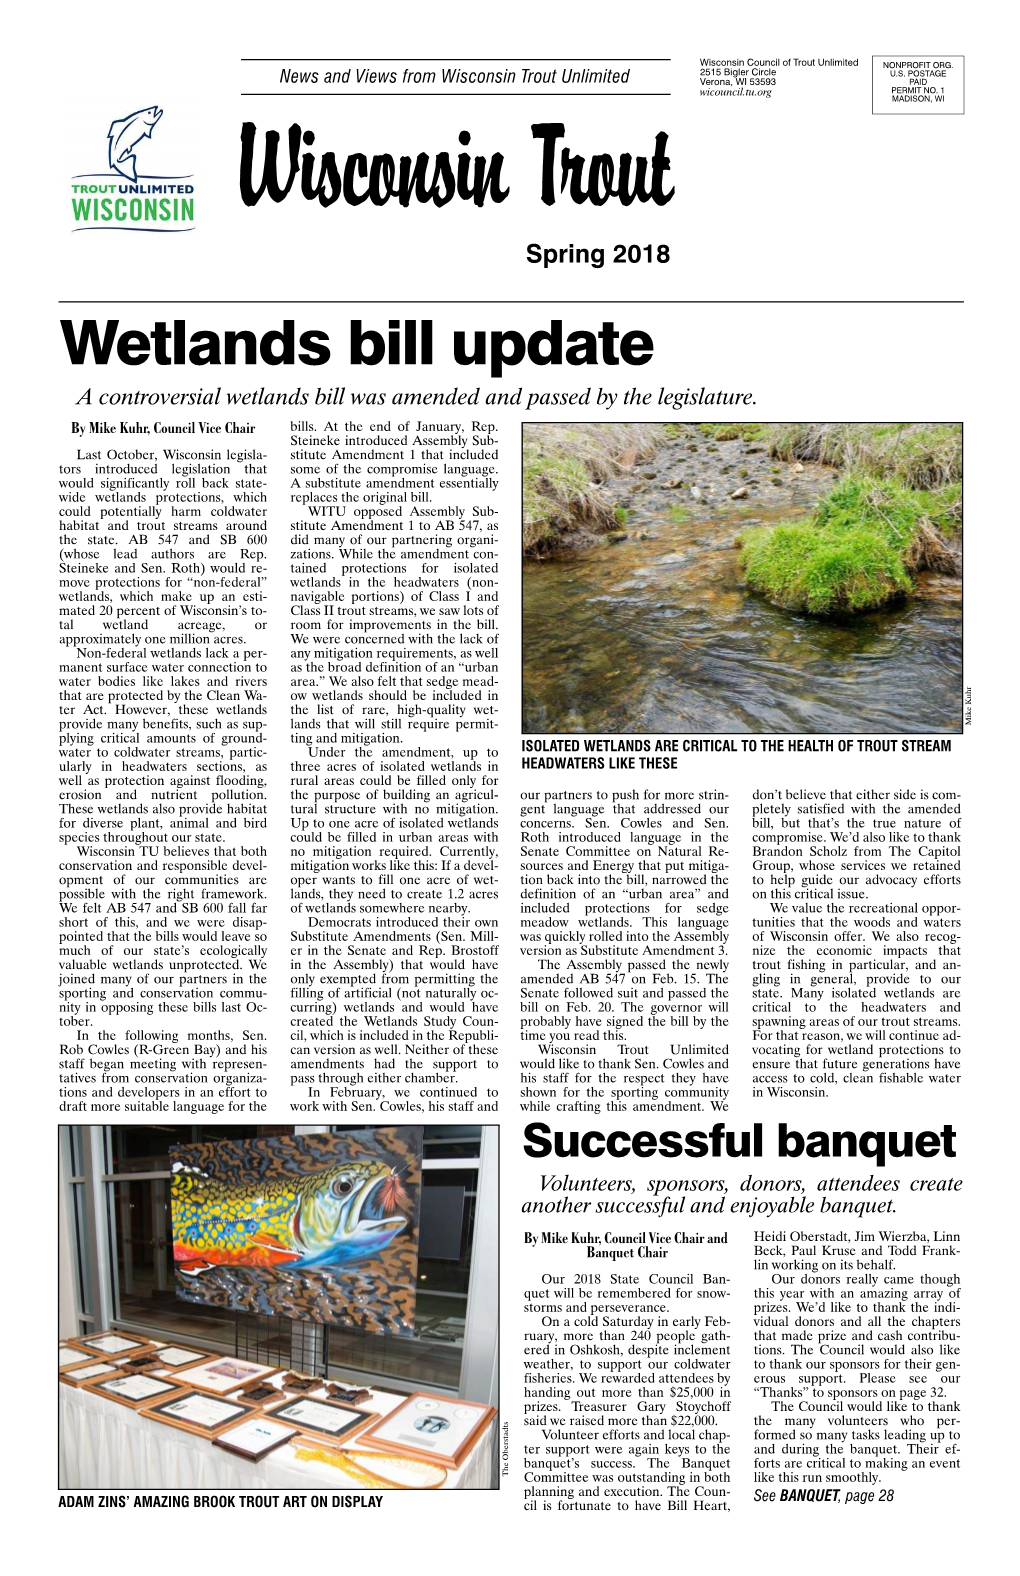 Wetlands Bill Update a Controversial Wetlands Bill Was Amended and Passed by the Legislature